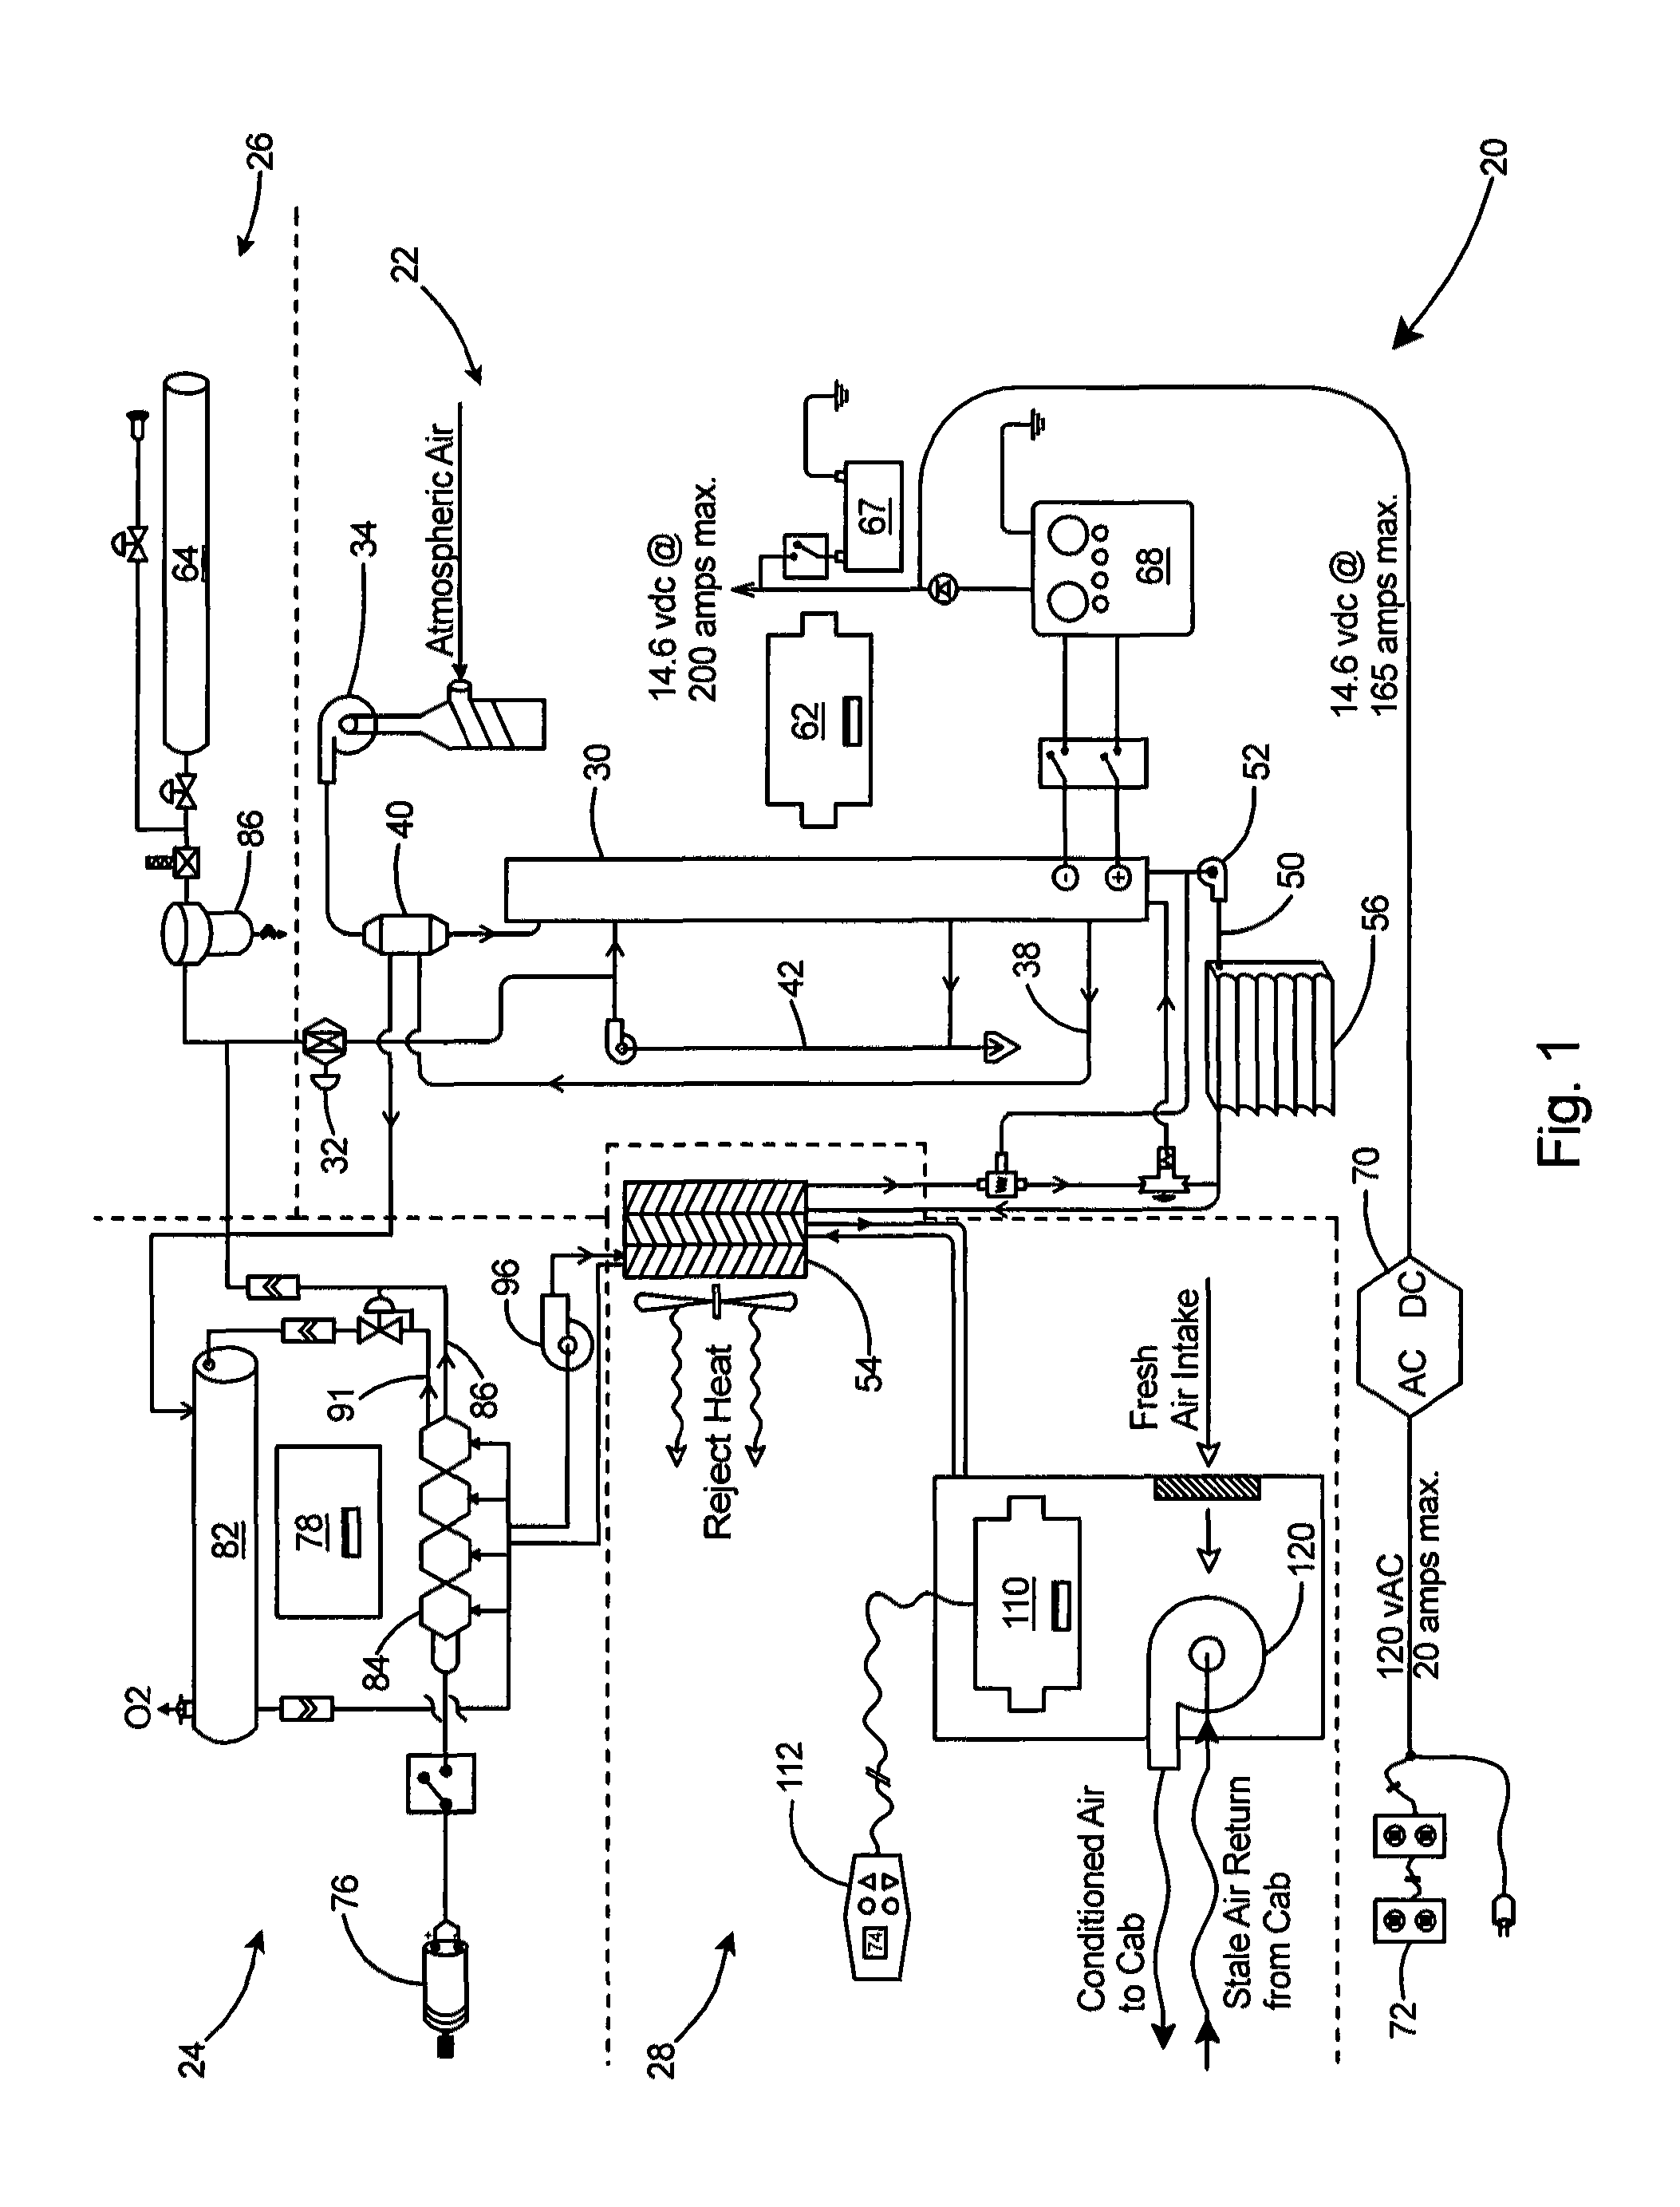 Hydrogen fuel cell driven HVAC and power system for engine-off operation including PEM regenerative hydrogen production